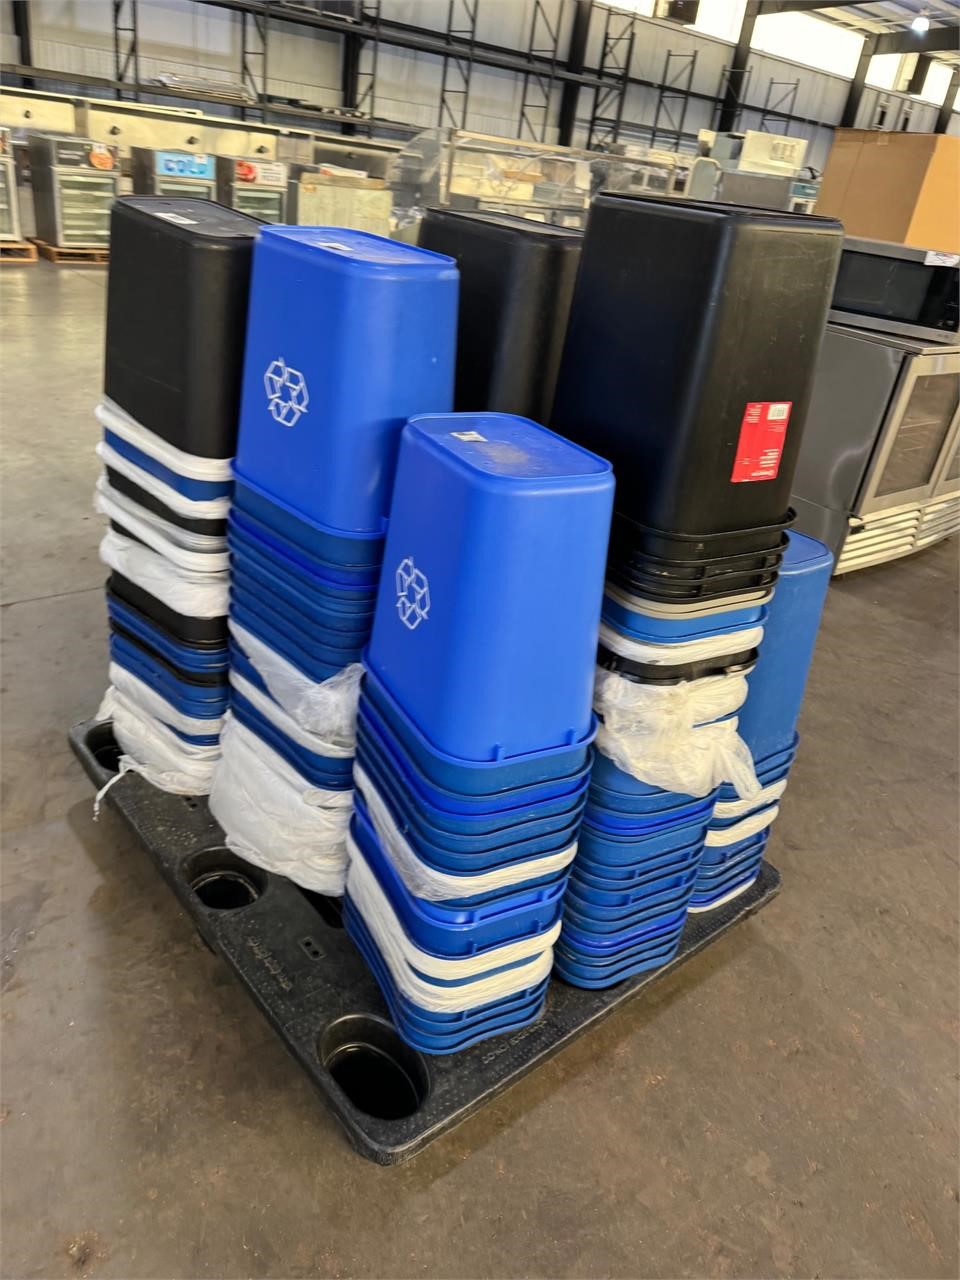 Pallet of office trash cans